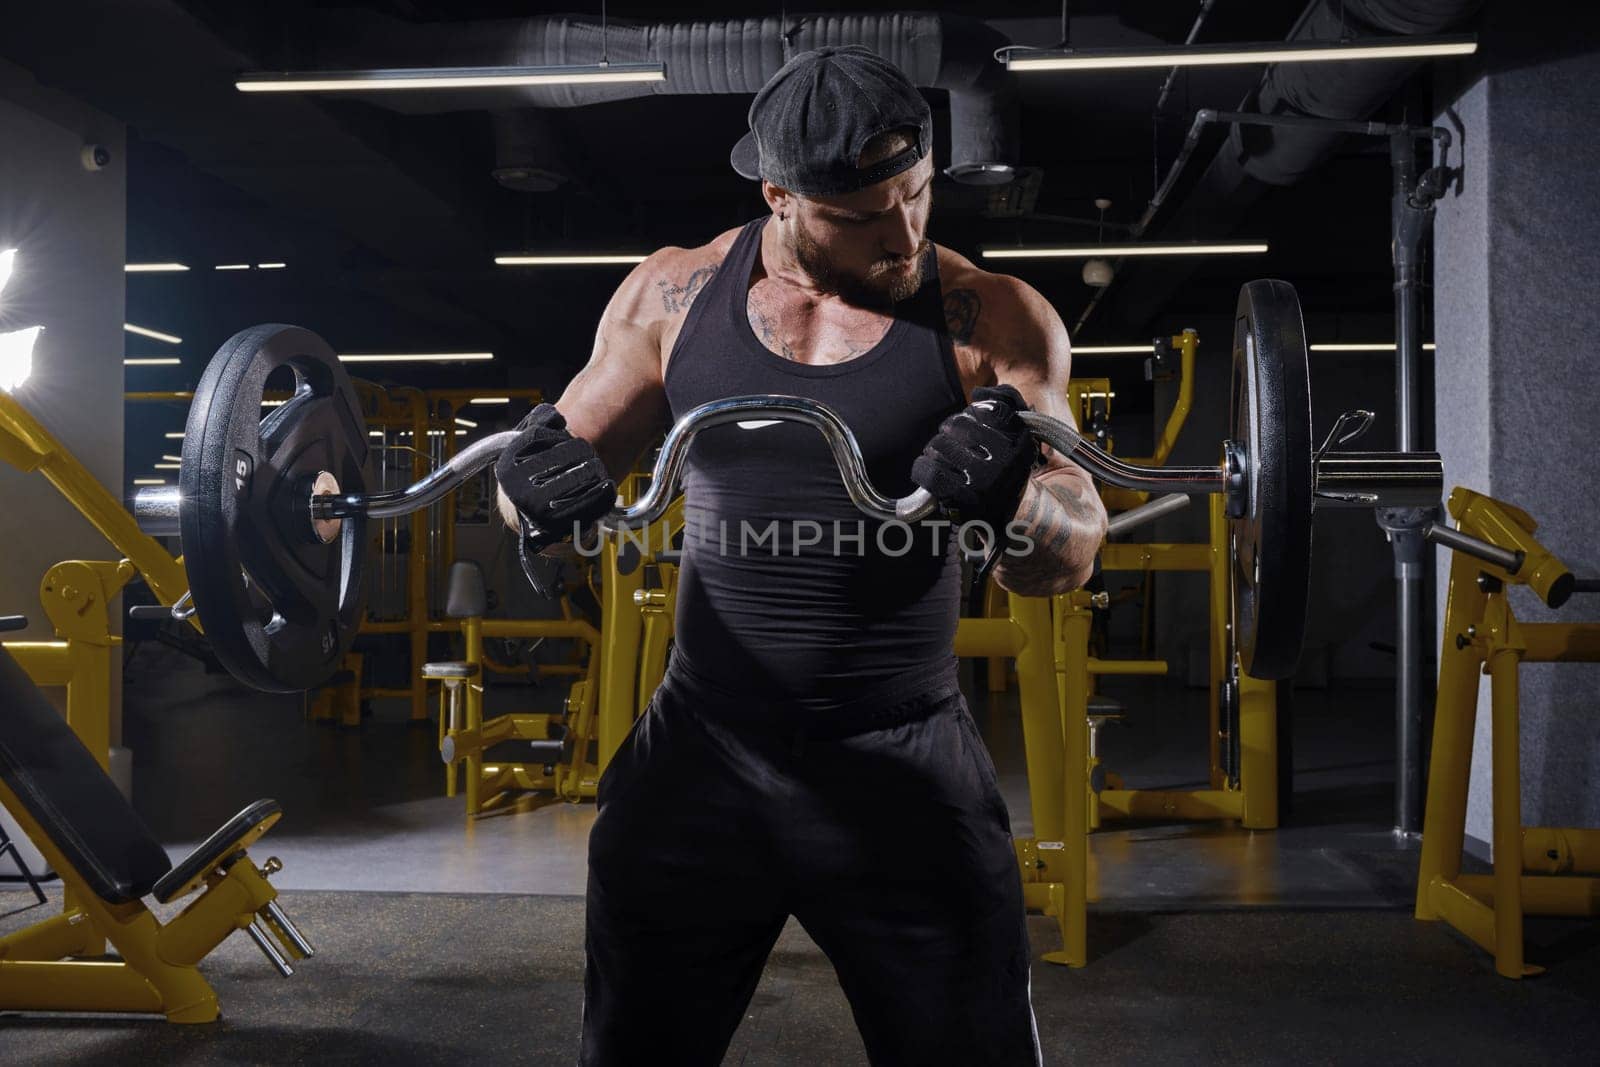 Tattooed, bearded man in black sport gloves, shorts, vest and cap. He is lifting a barbell, training his muscles, looking at his biceps while standing in dark gym with yellow equipment. Close up